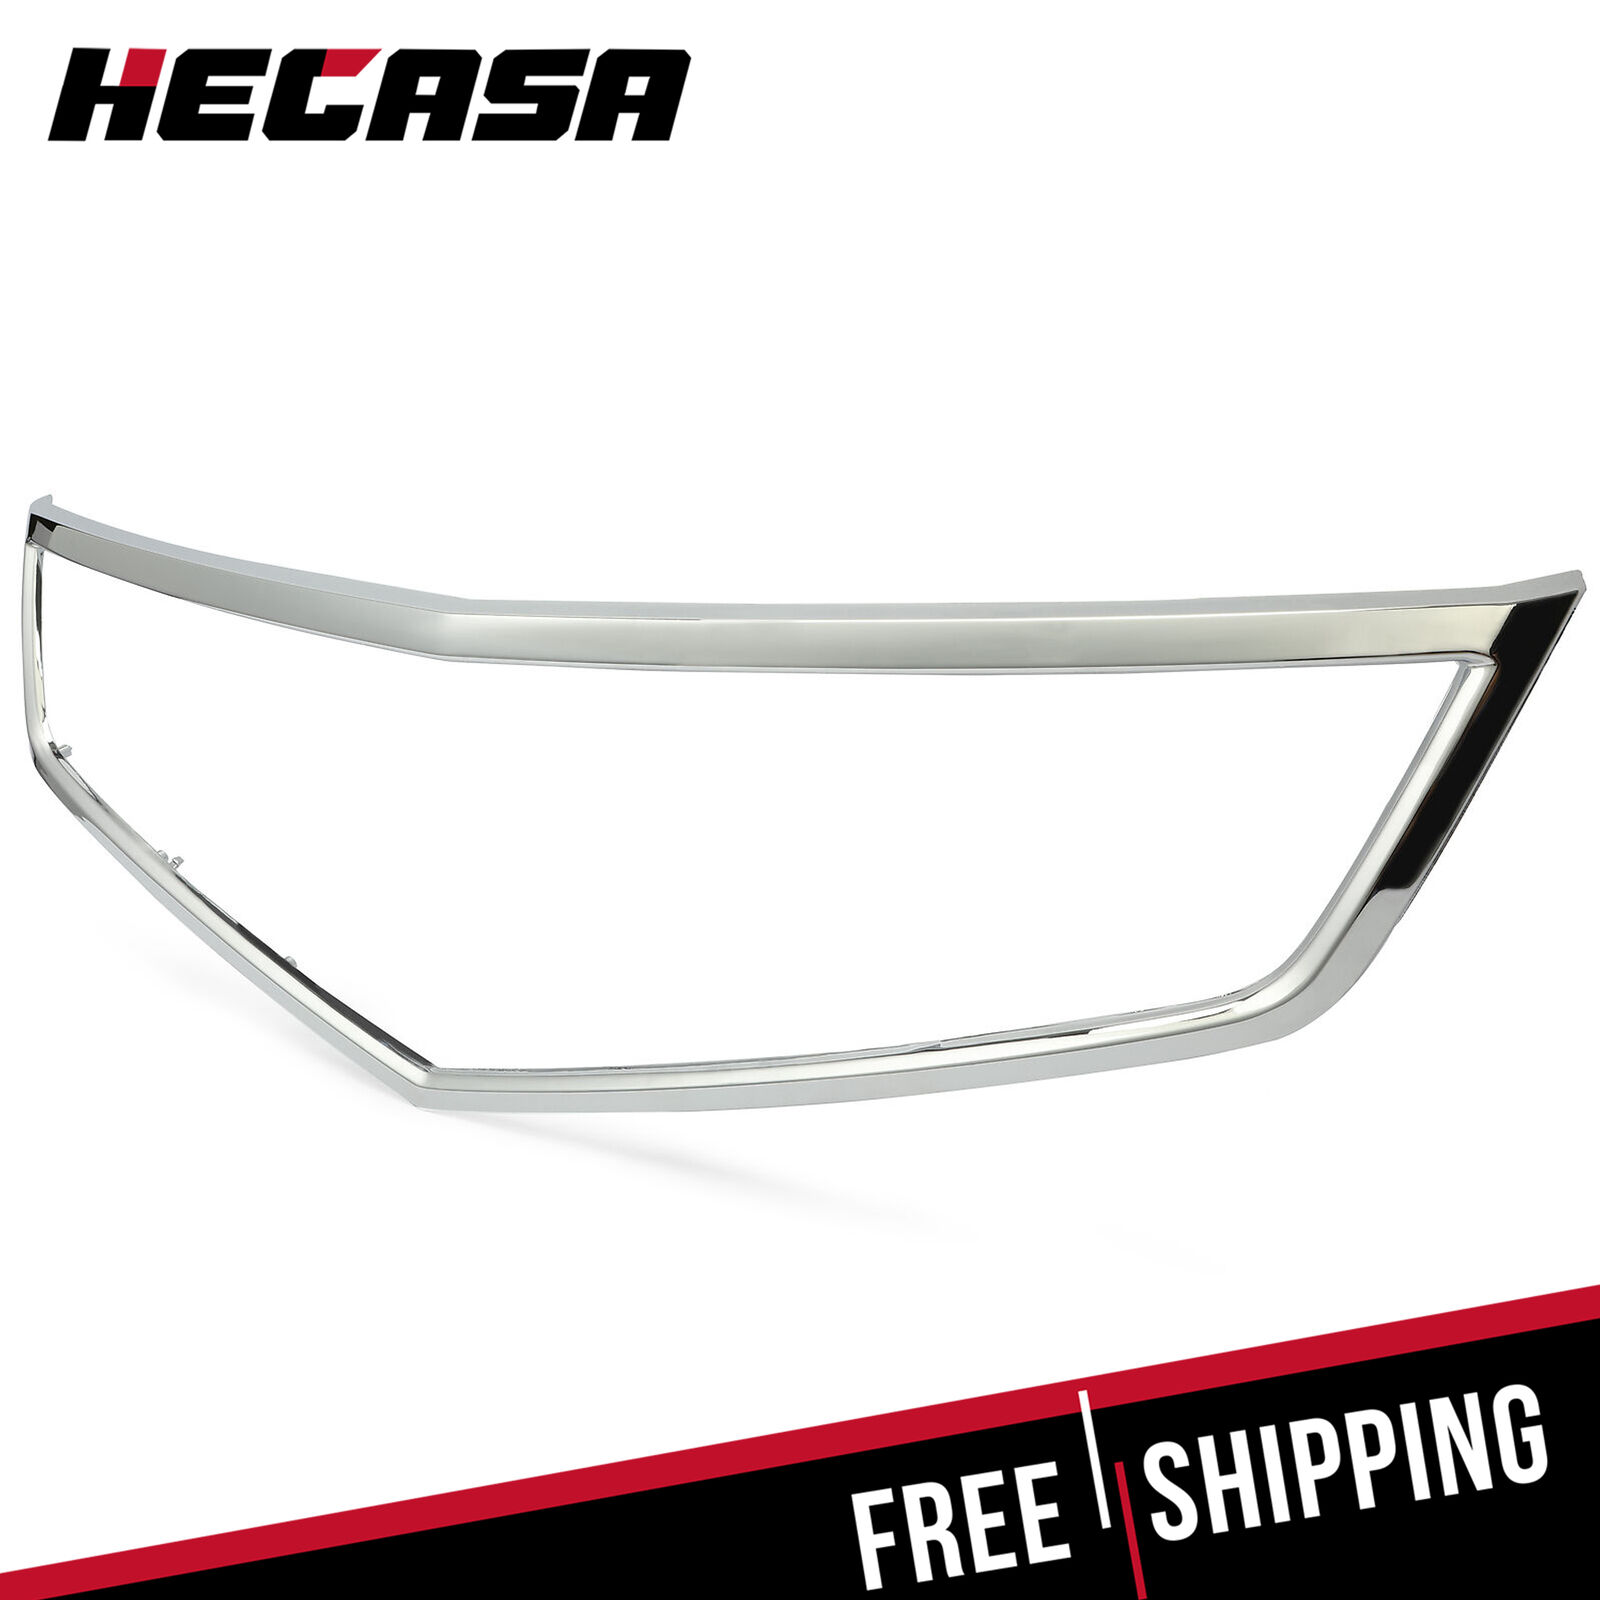 HECASA Chrome Grille Trim Grill For Acura TSX 2006-08 For AC1210108 71122SECA02